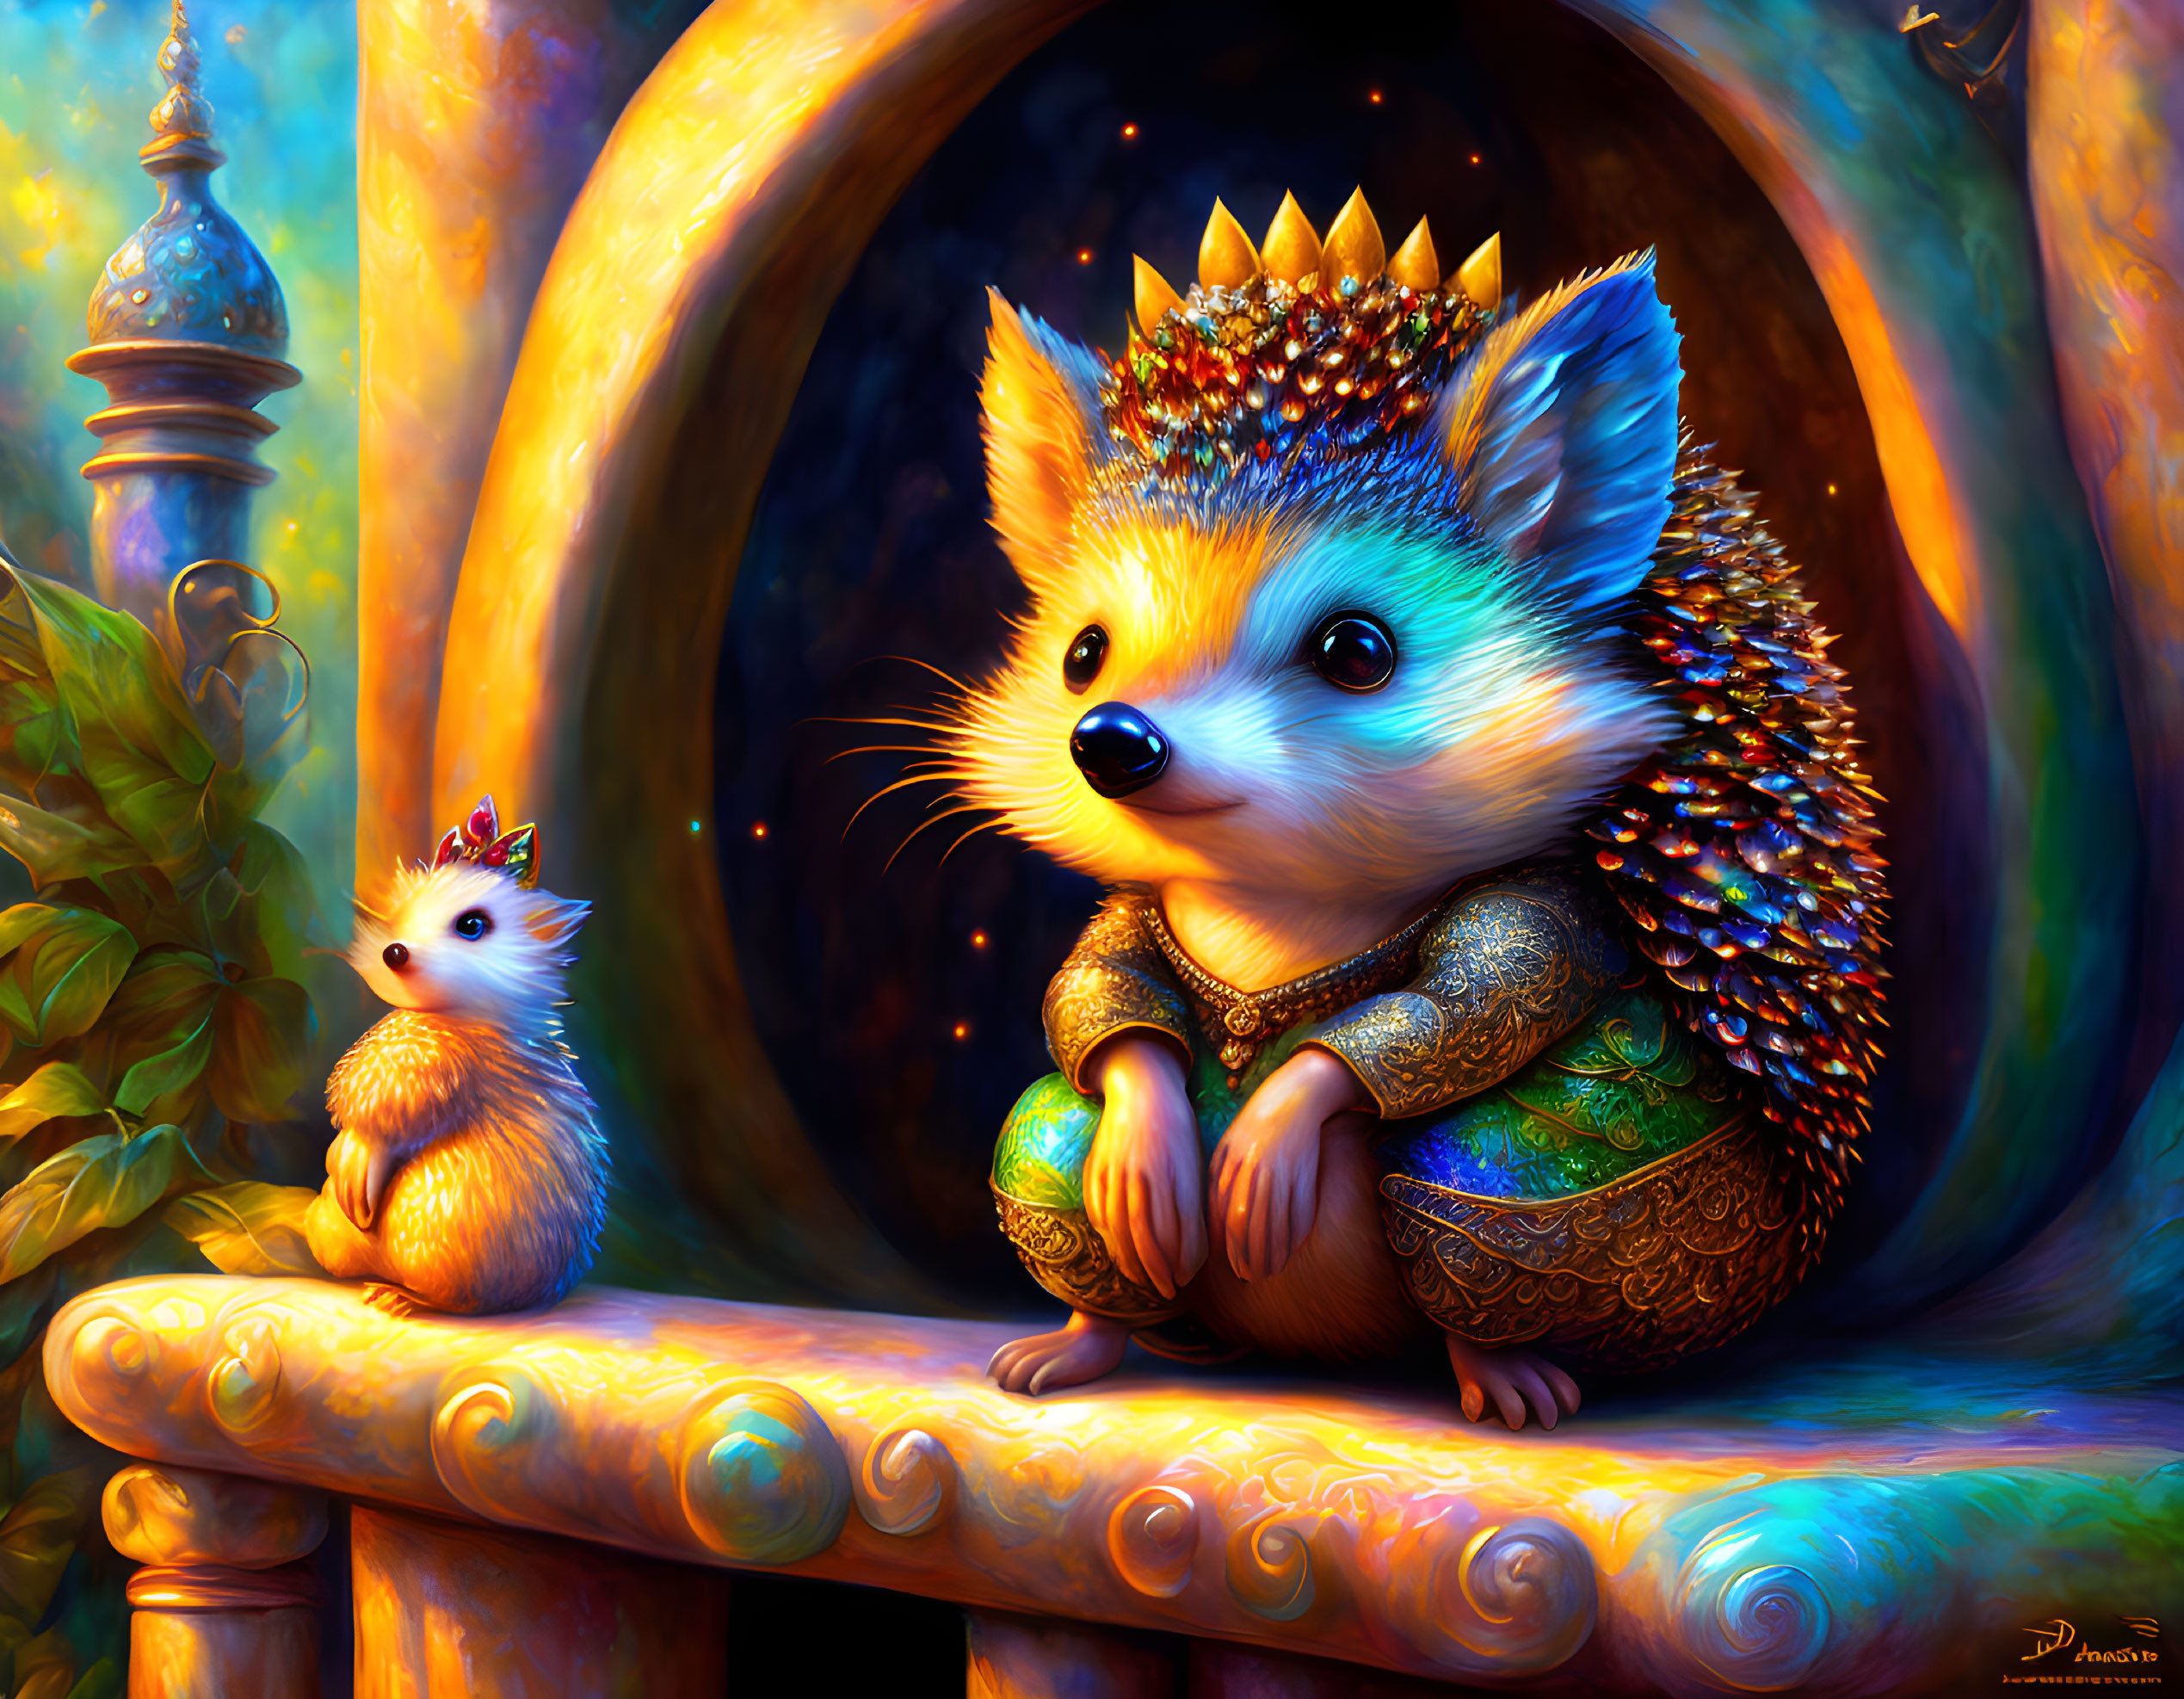 Regal large and small hedgehogs near ornate window with warm light